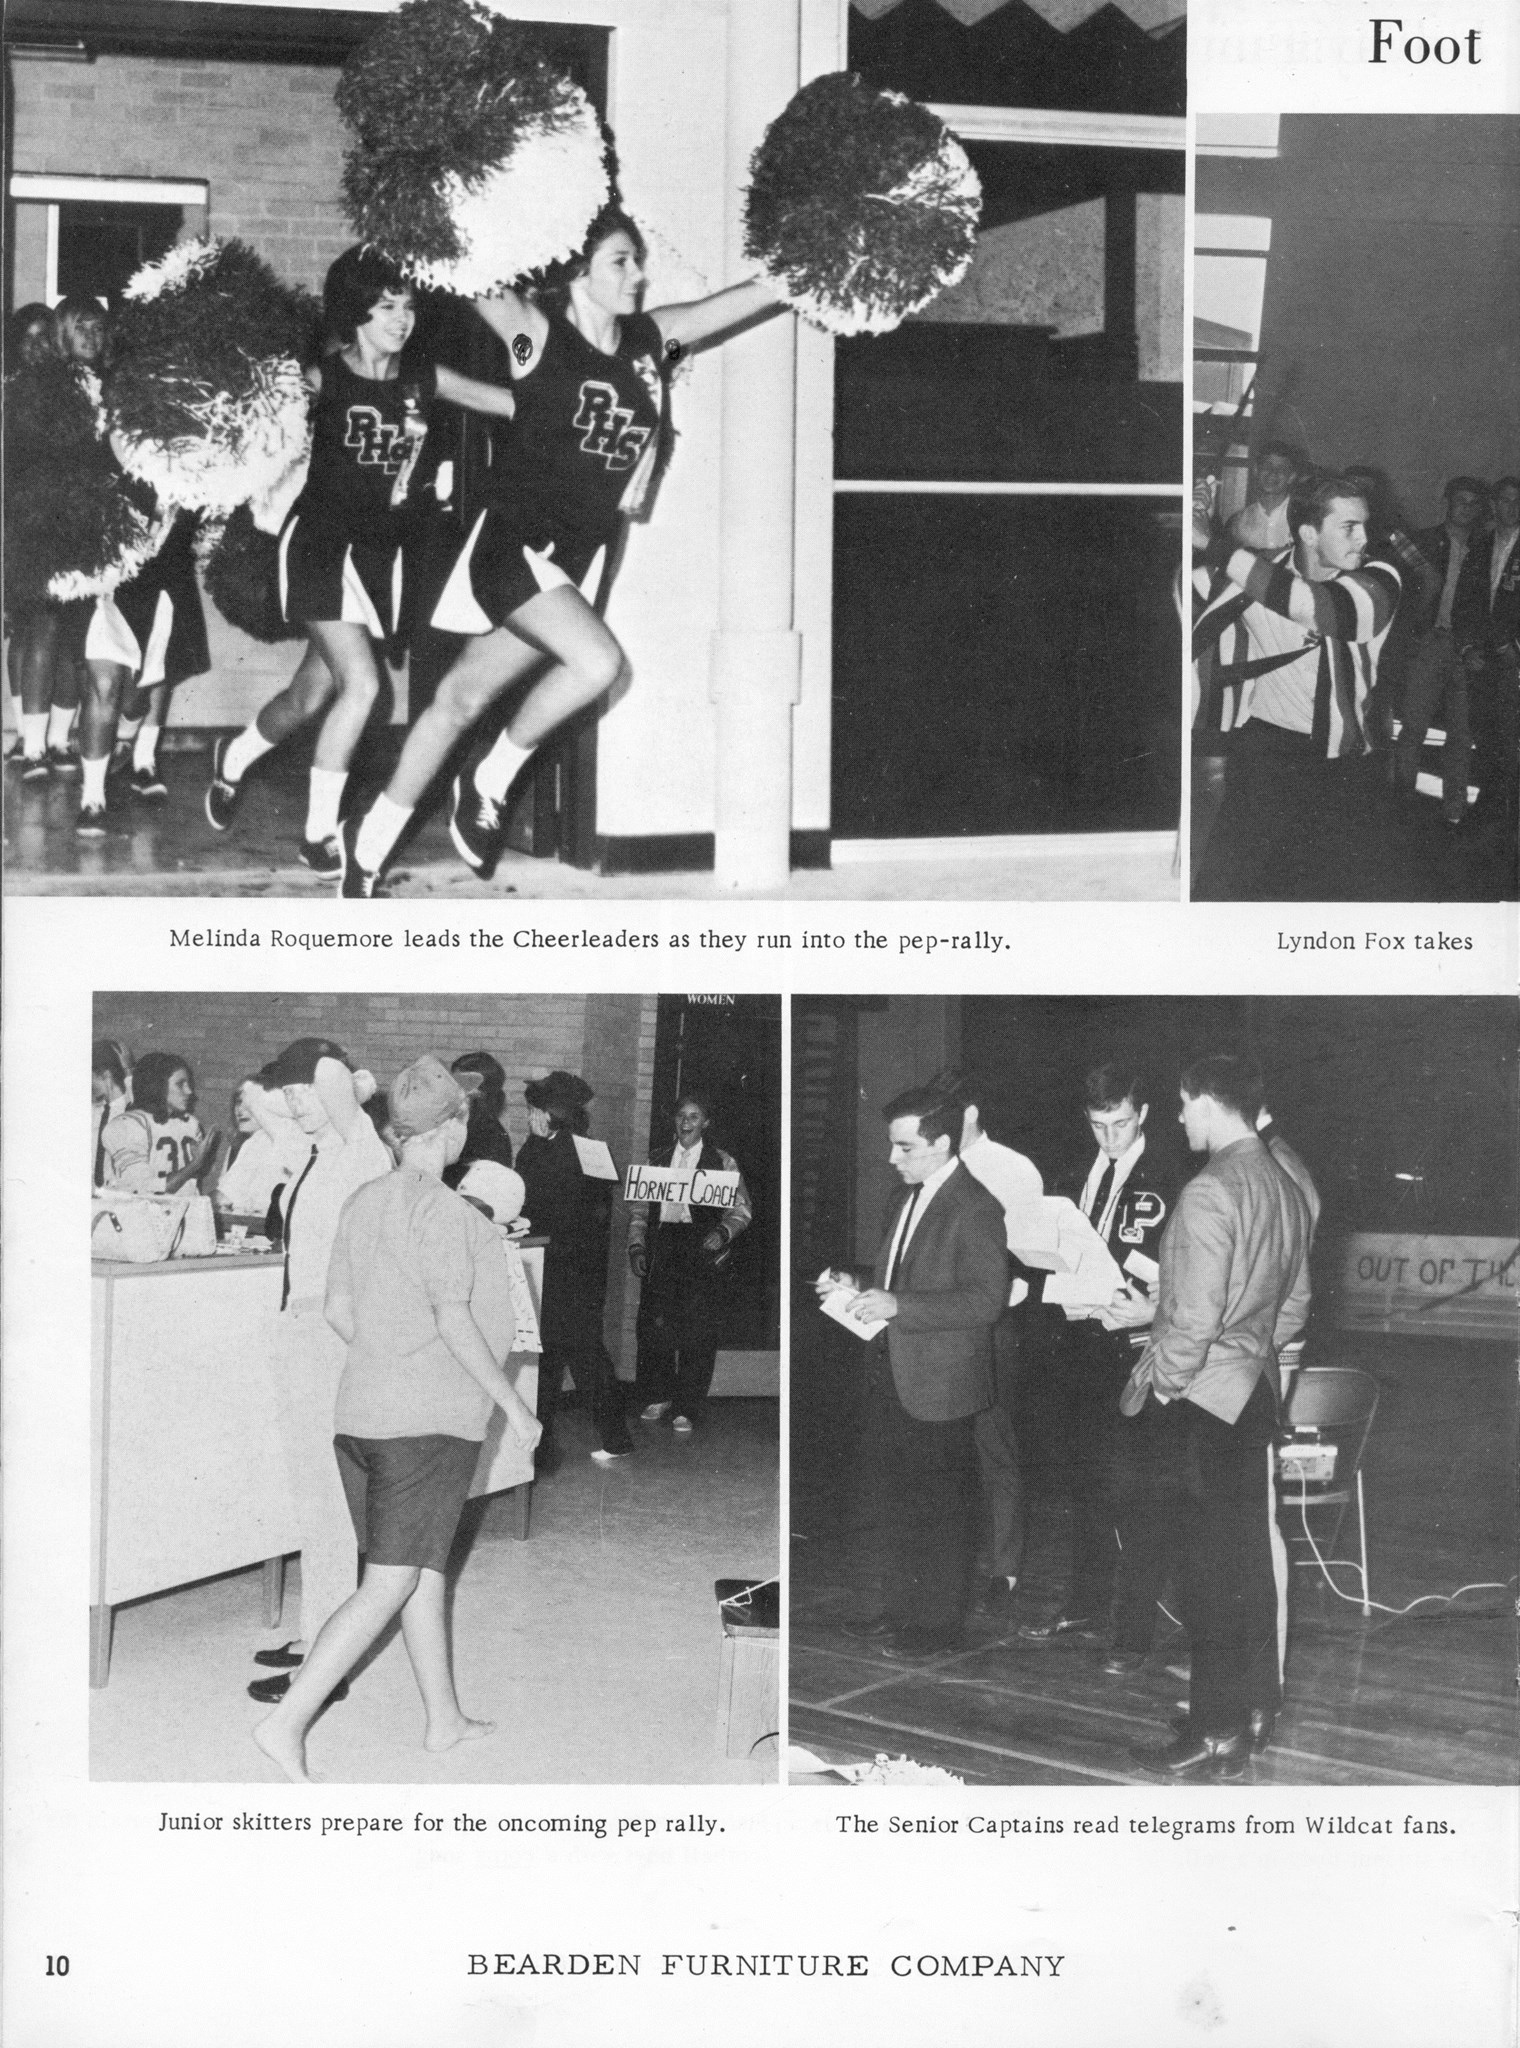 ../../../Images/Large/1967/Arclight-1967-pg0010.jpg